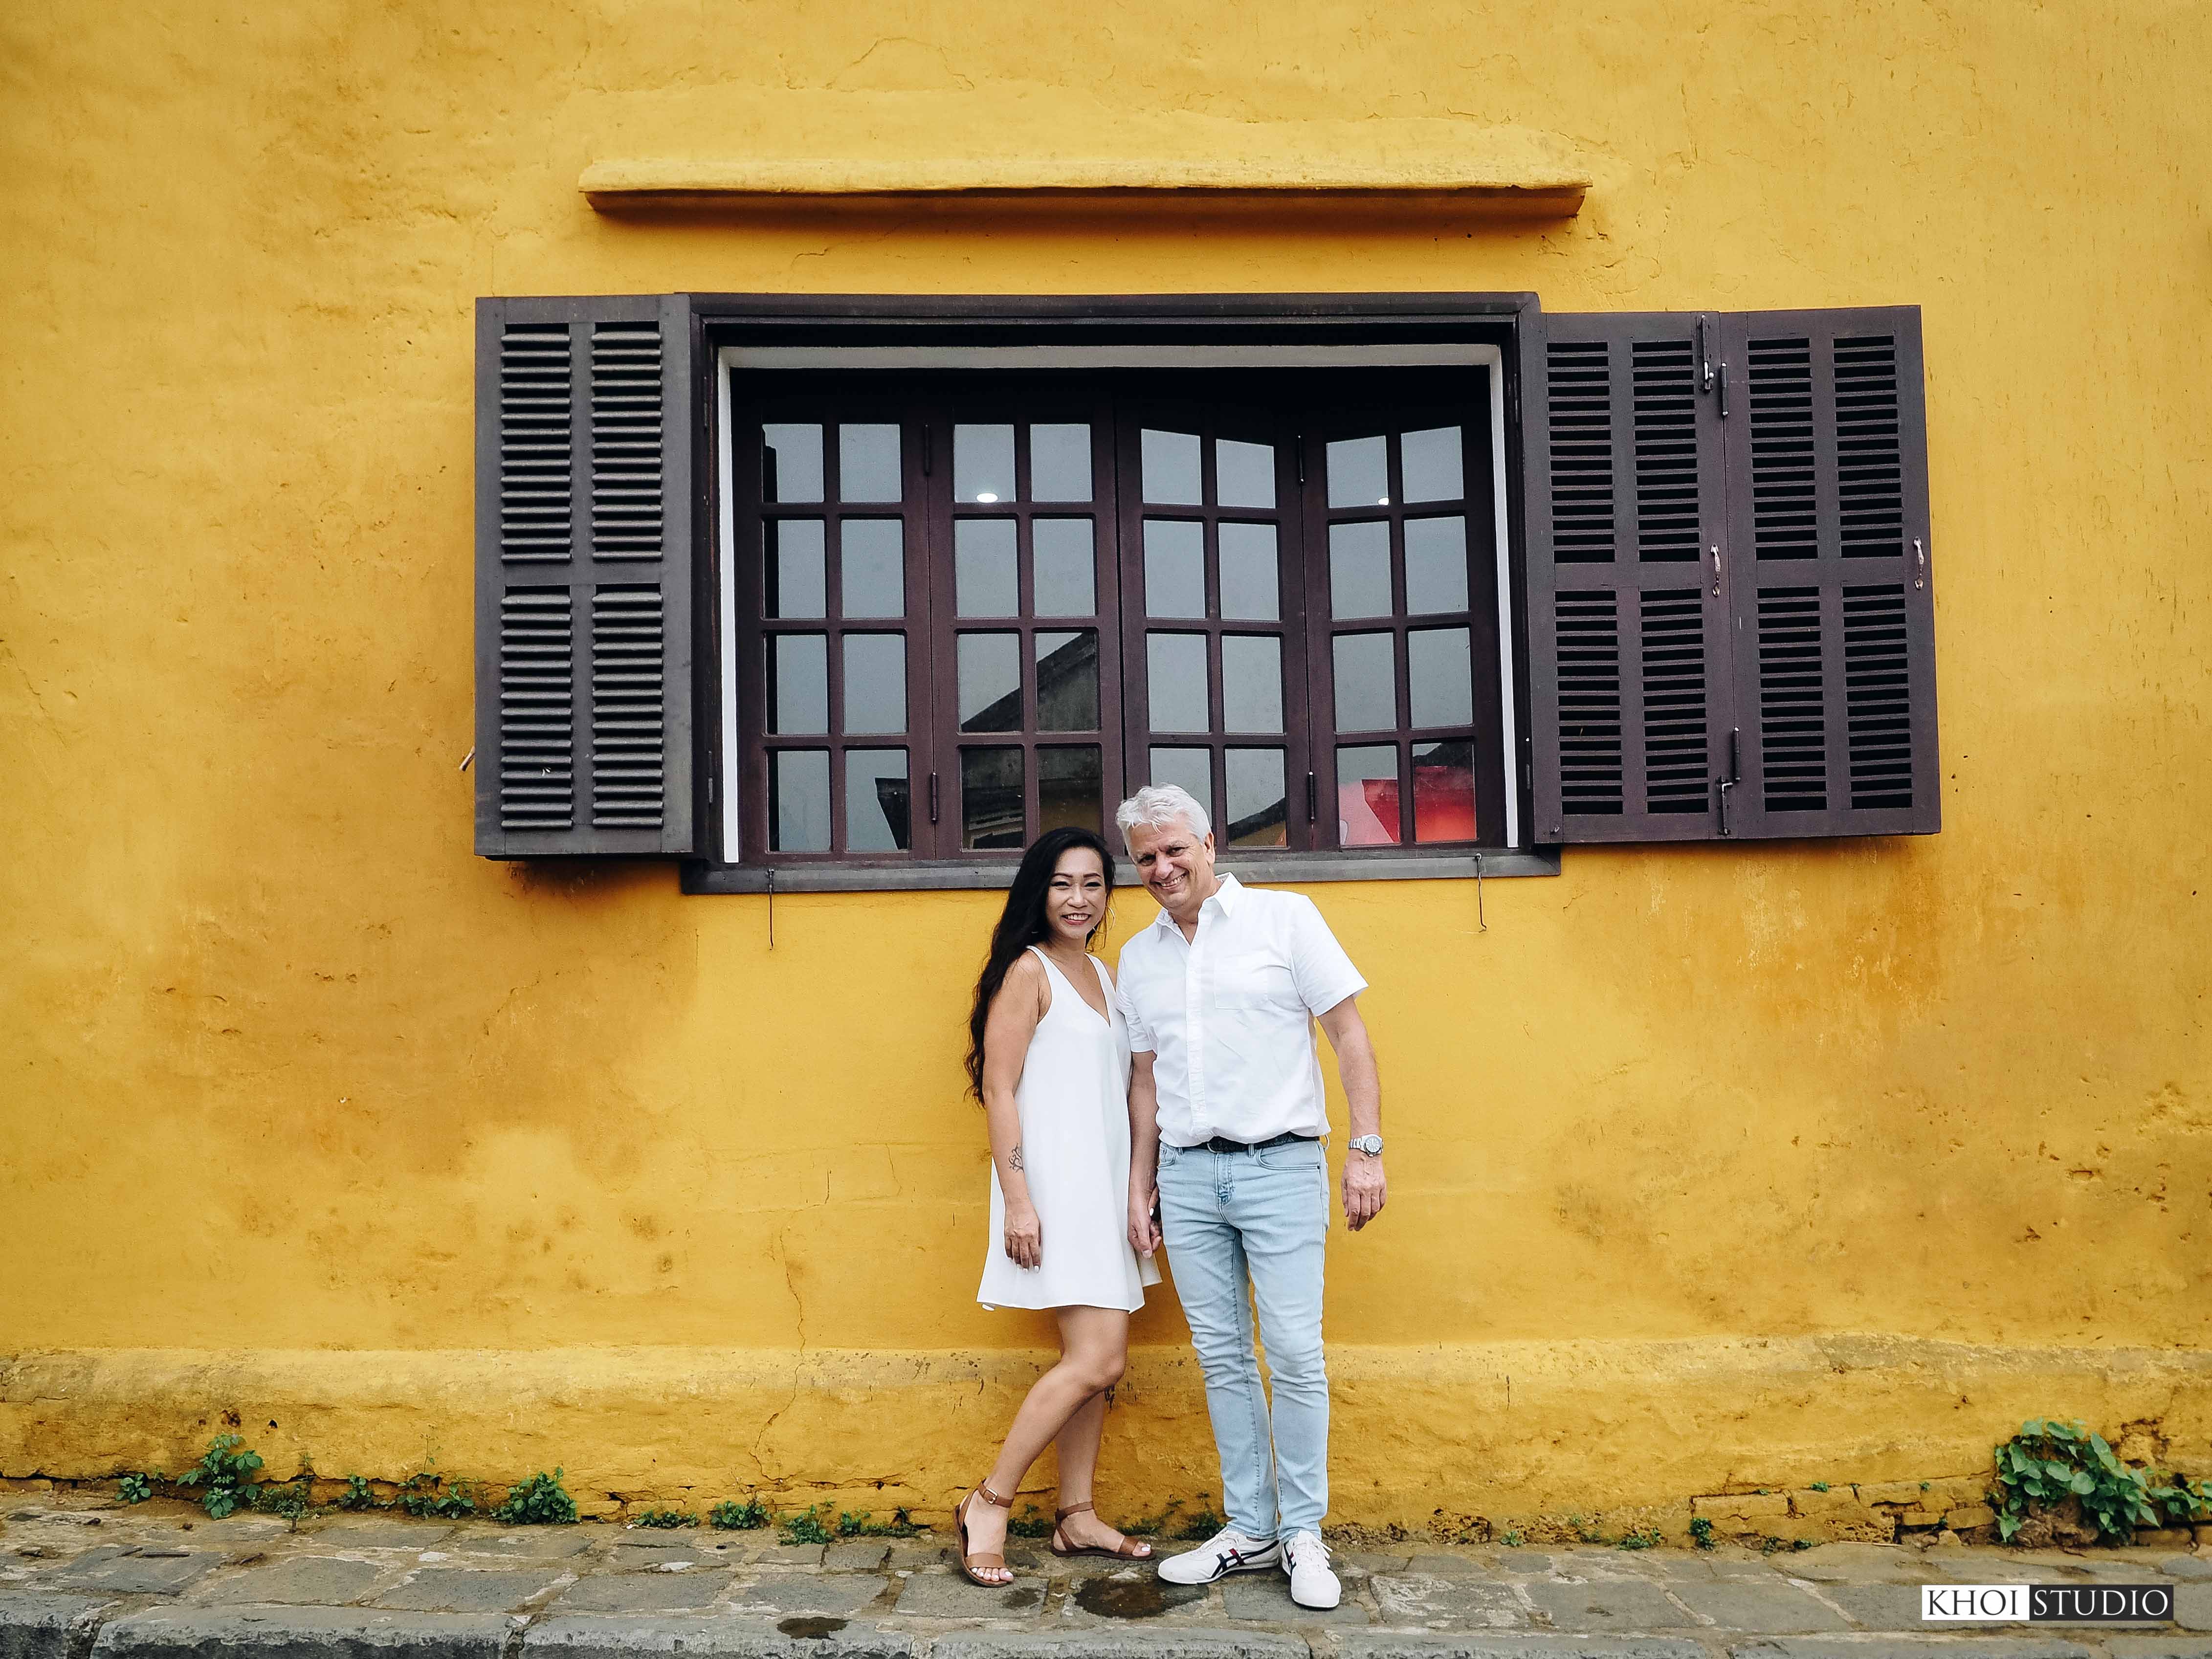 Travel couple photography service in Da Nang & Hoi An: Walking to take pictures by the legendary walls in the old town